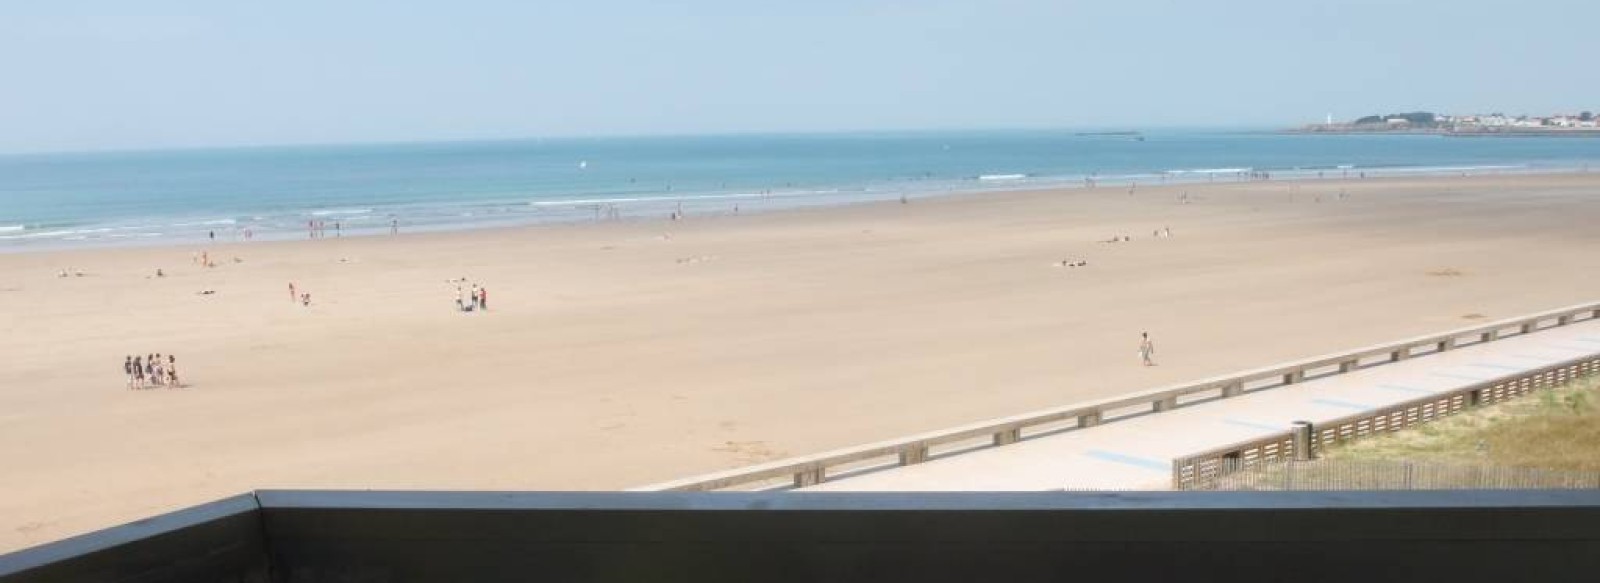 APPT FRONT MER DIRECT PLAGE - 4 PERS